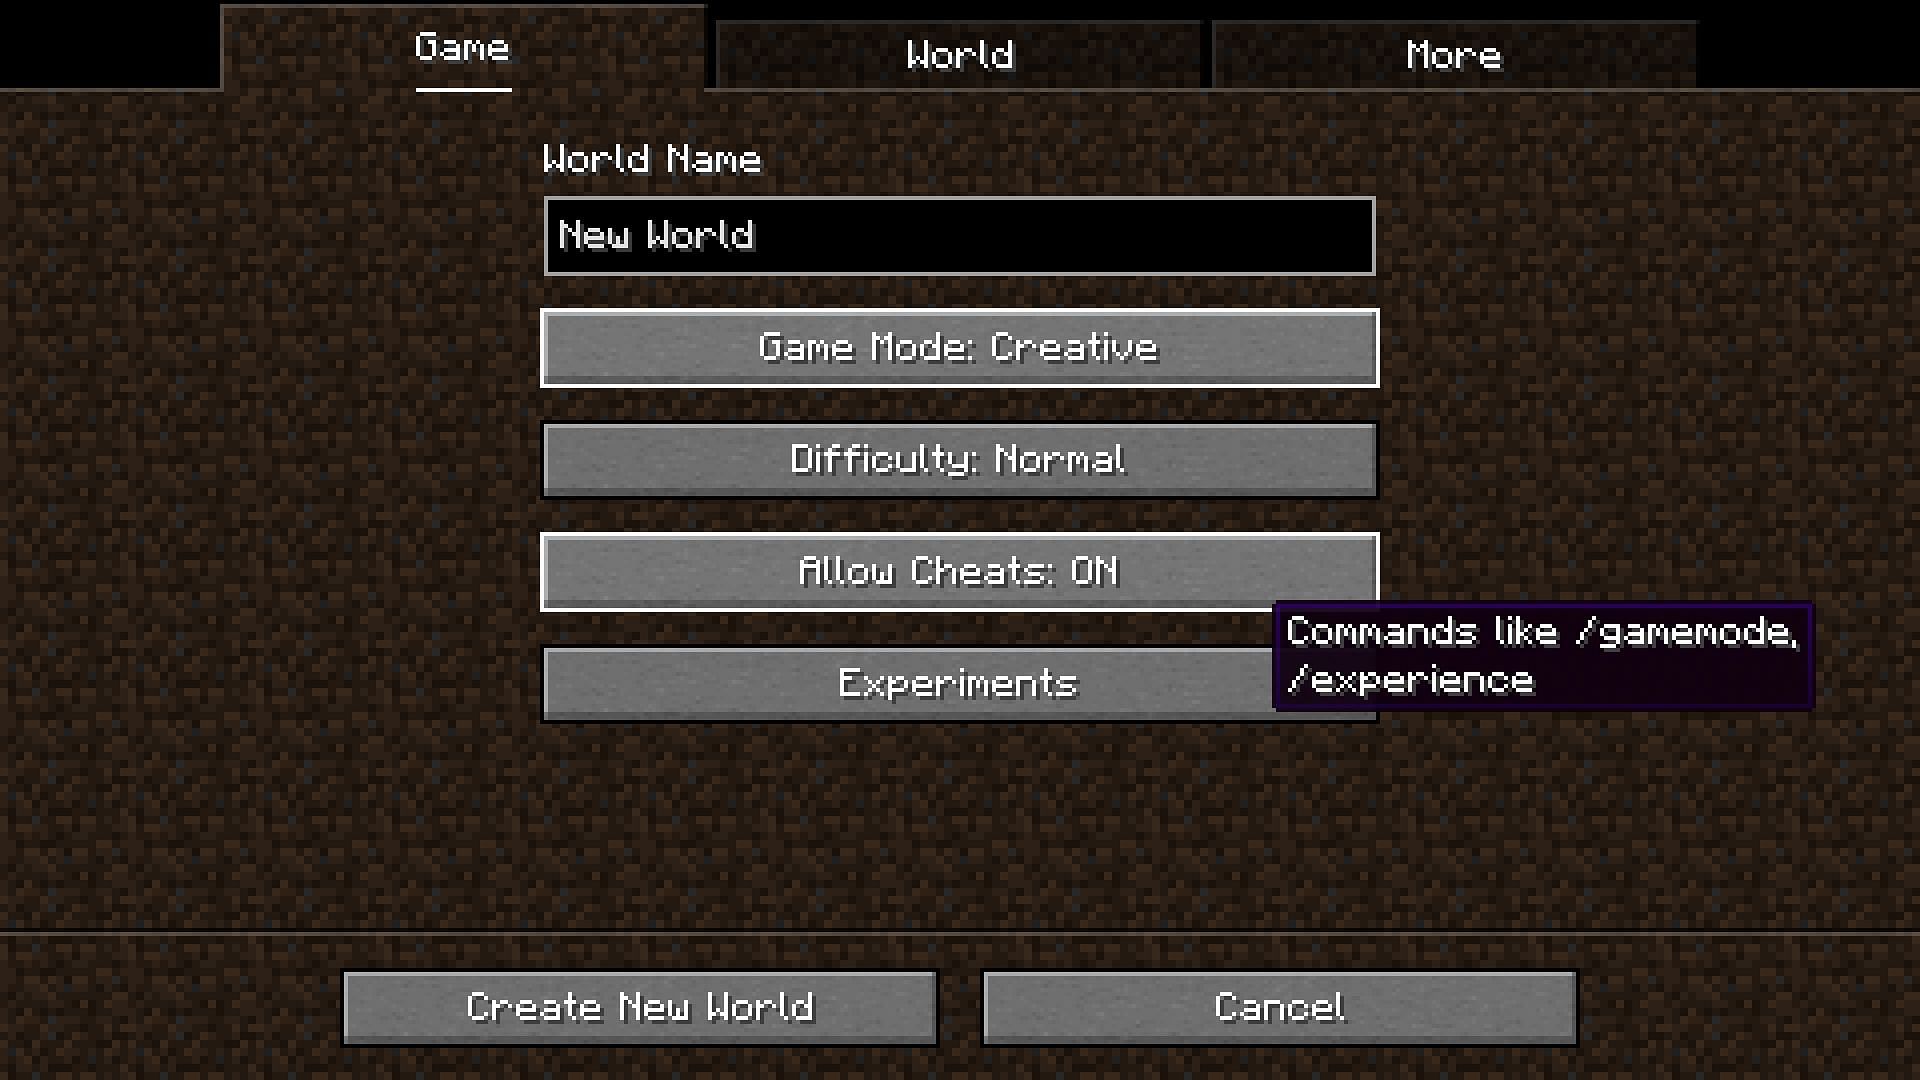 Cheats can be enabled while creating a new world in Minecraft (Image via Mojang)